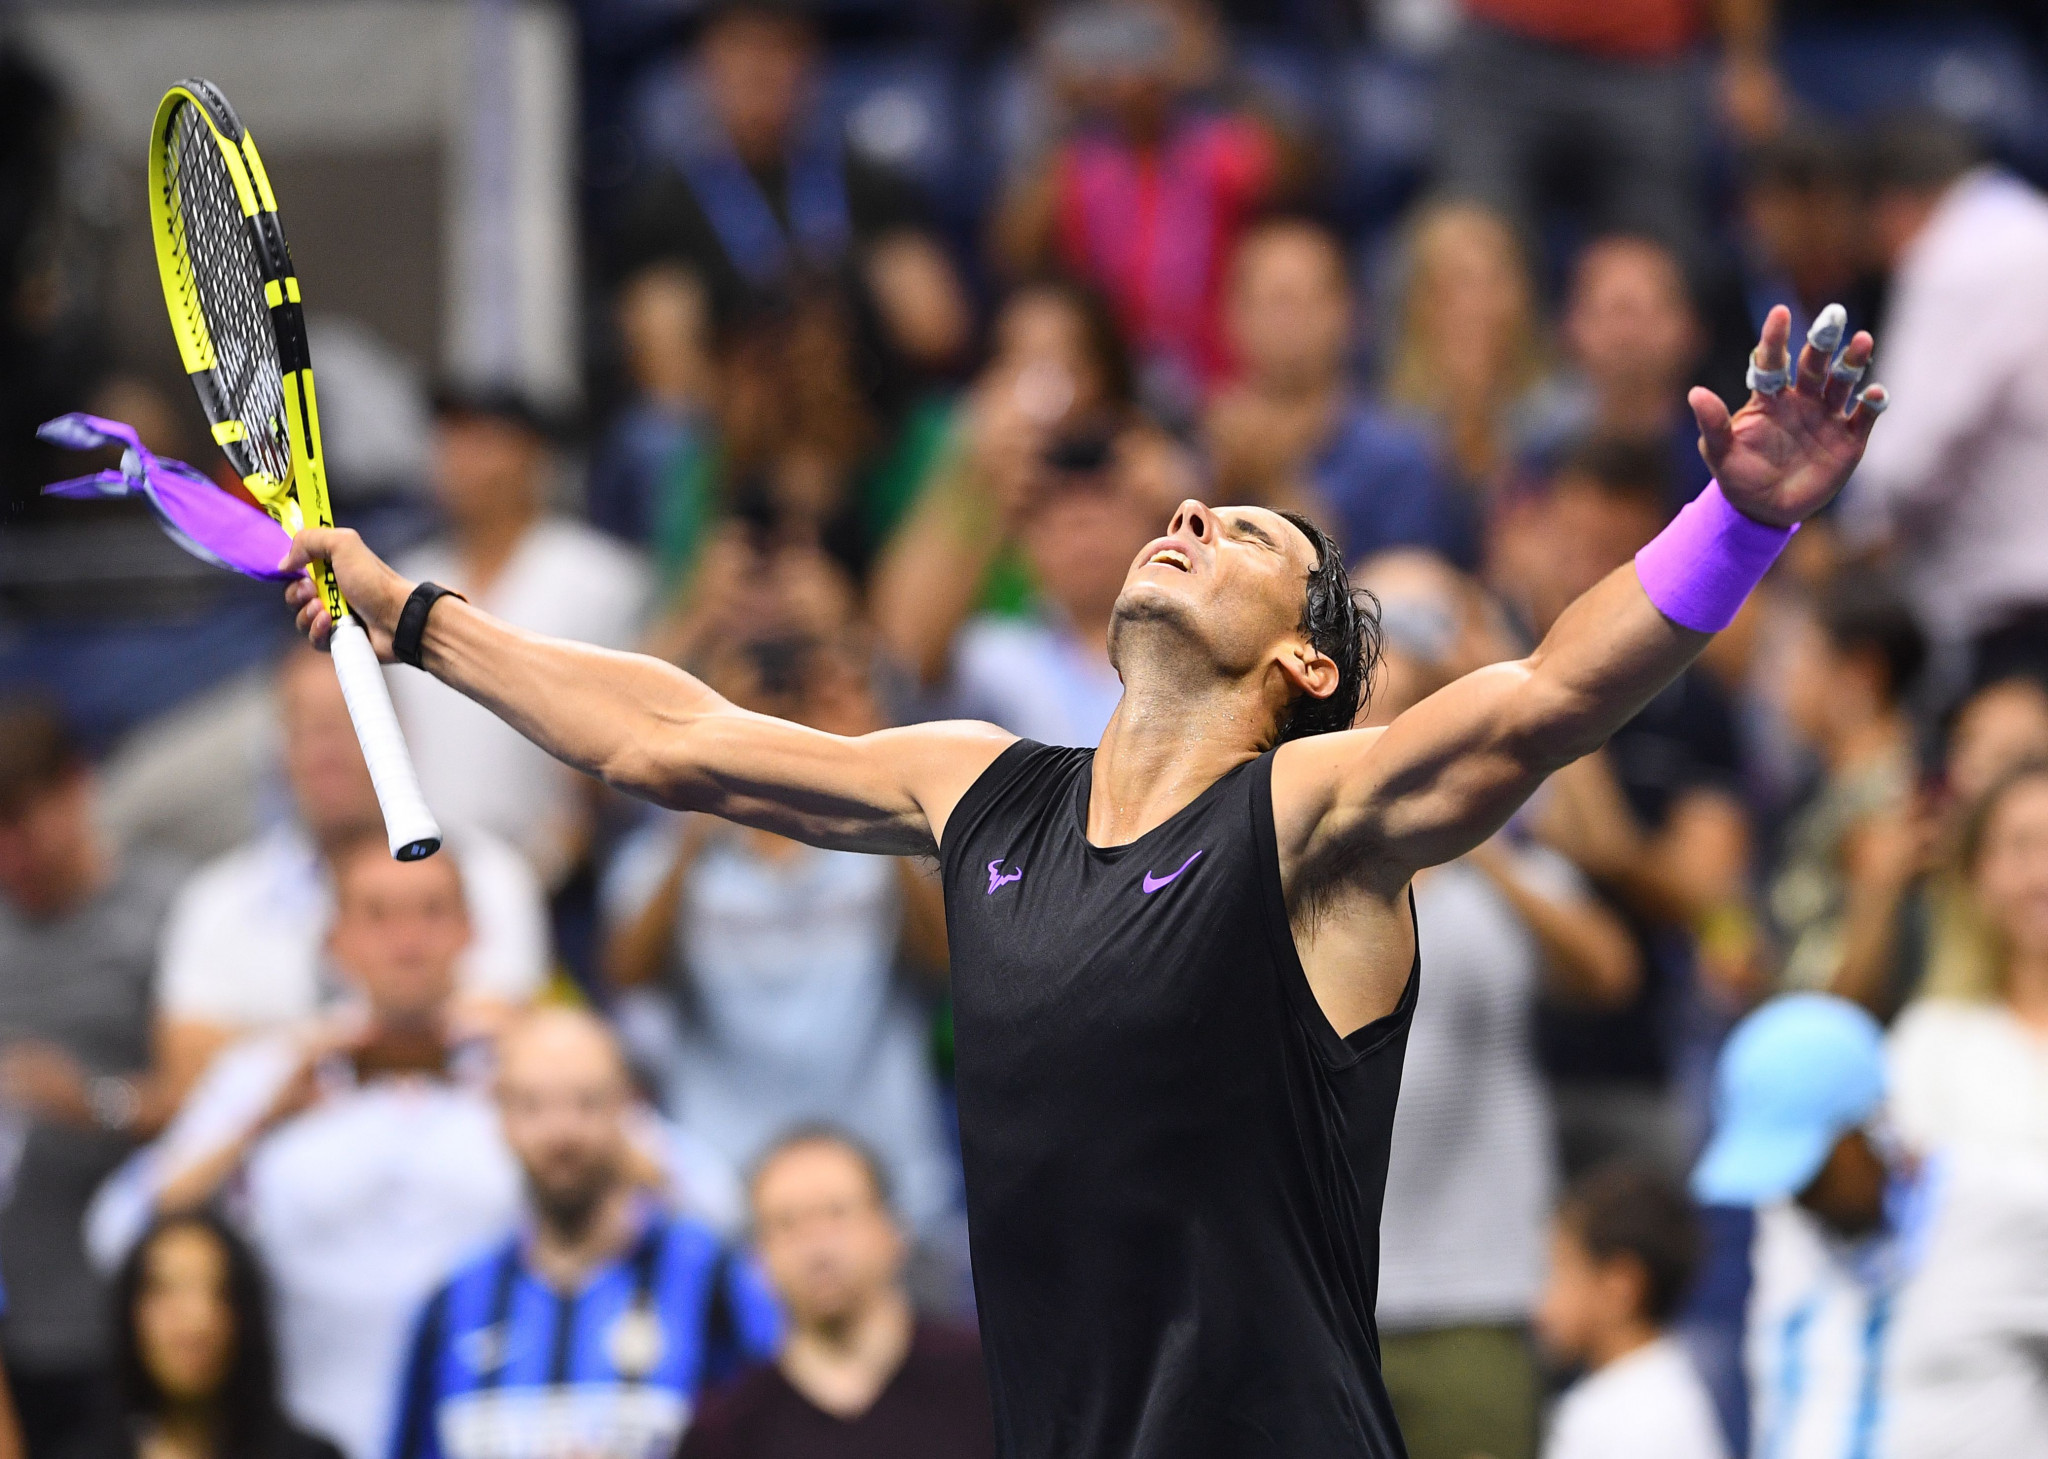 Rafael Nadal won a tricky contest in straight sets ©Getty Images